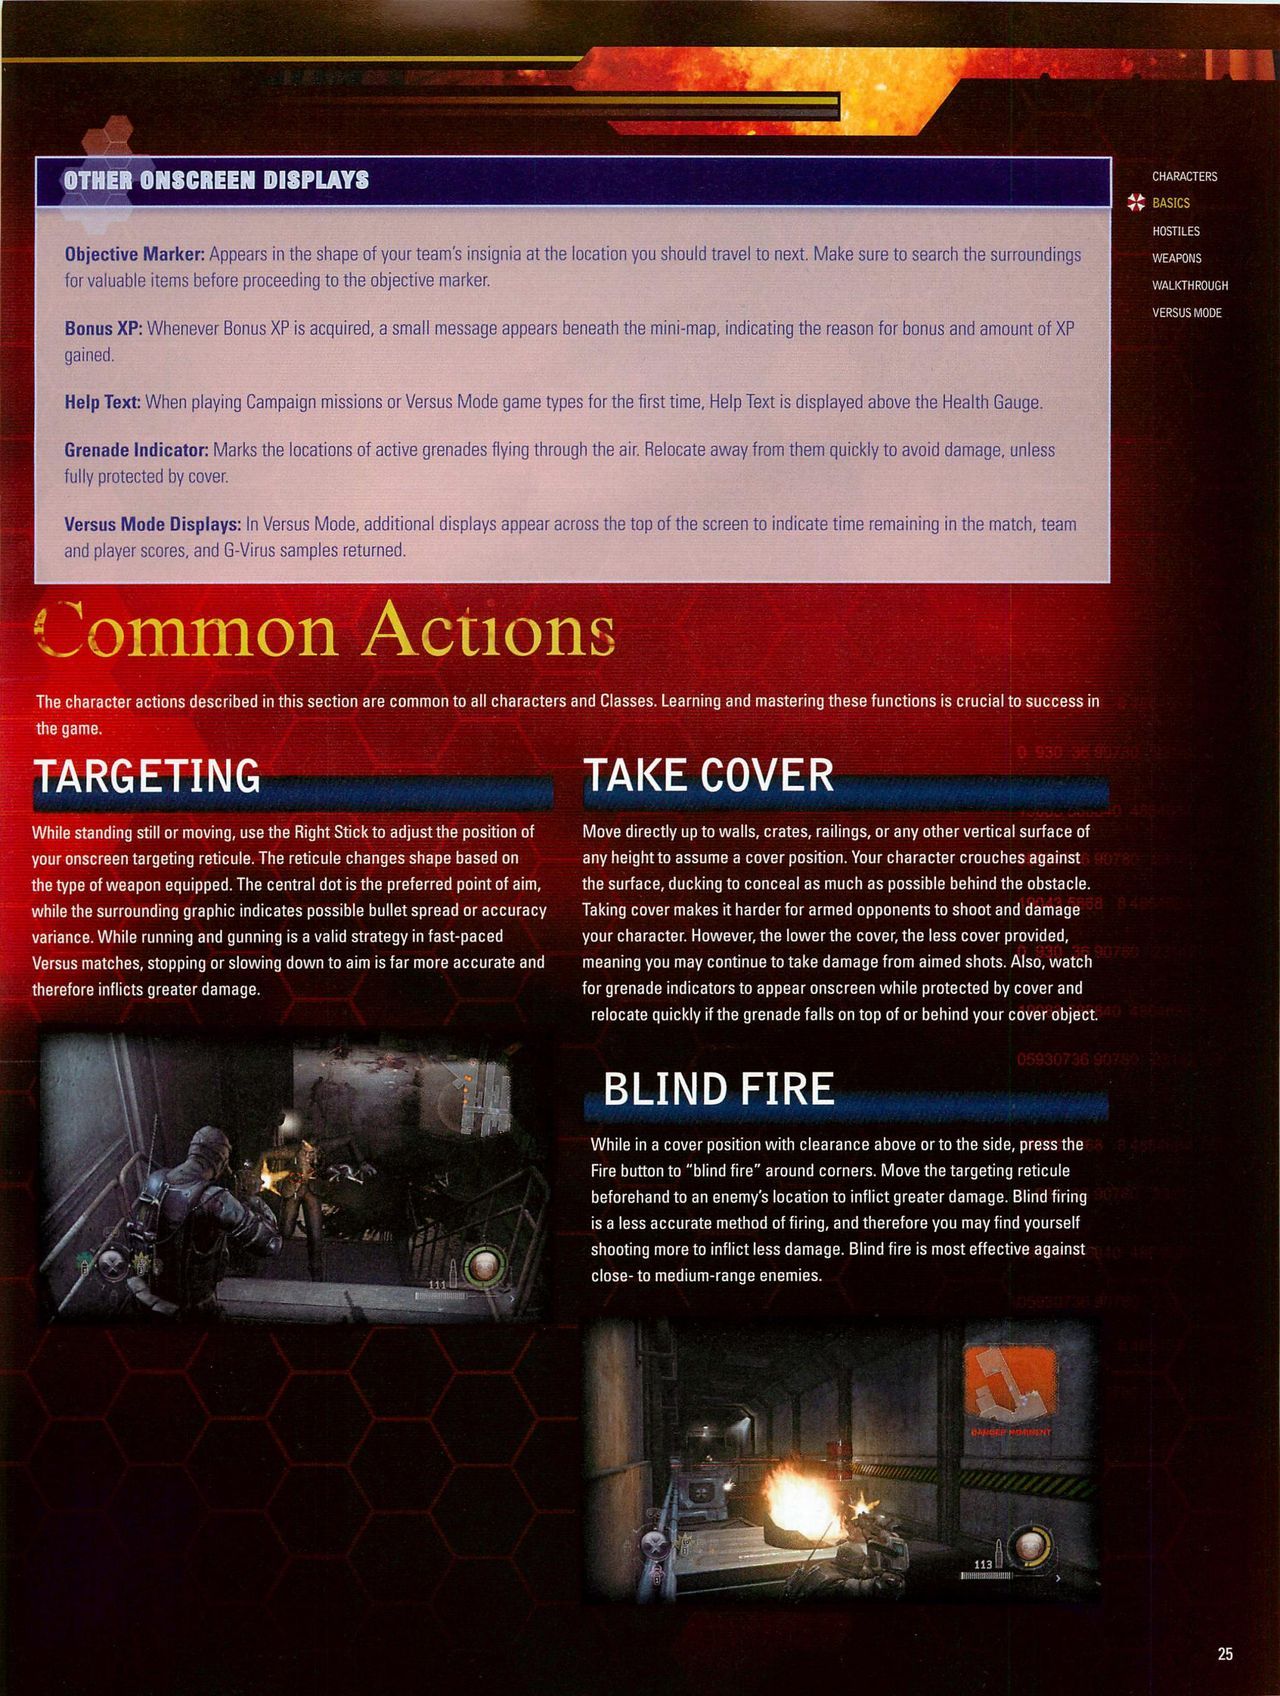 Resident Evil: Operation Raccoon City Official Strategy Guide (watermarked) 27